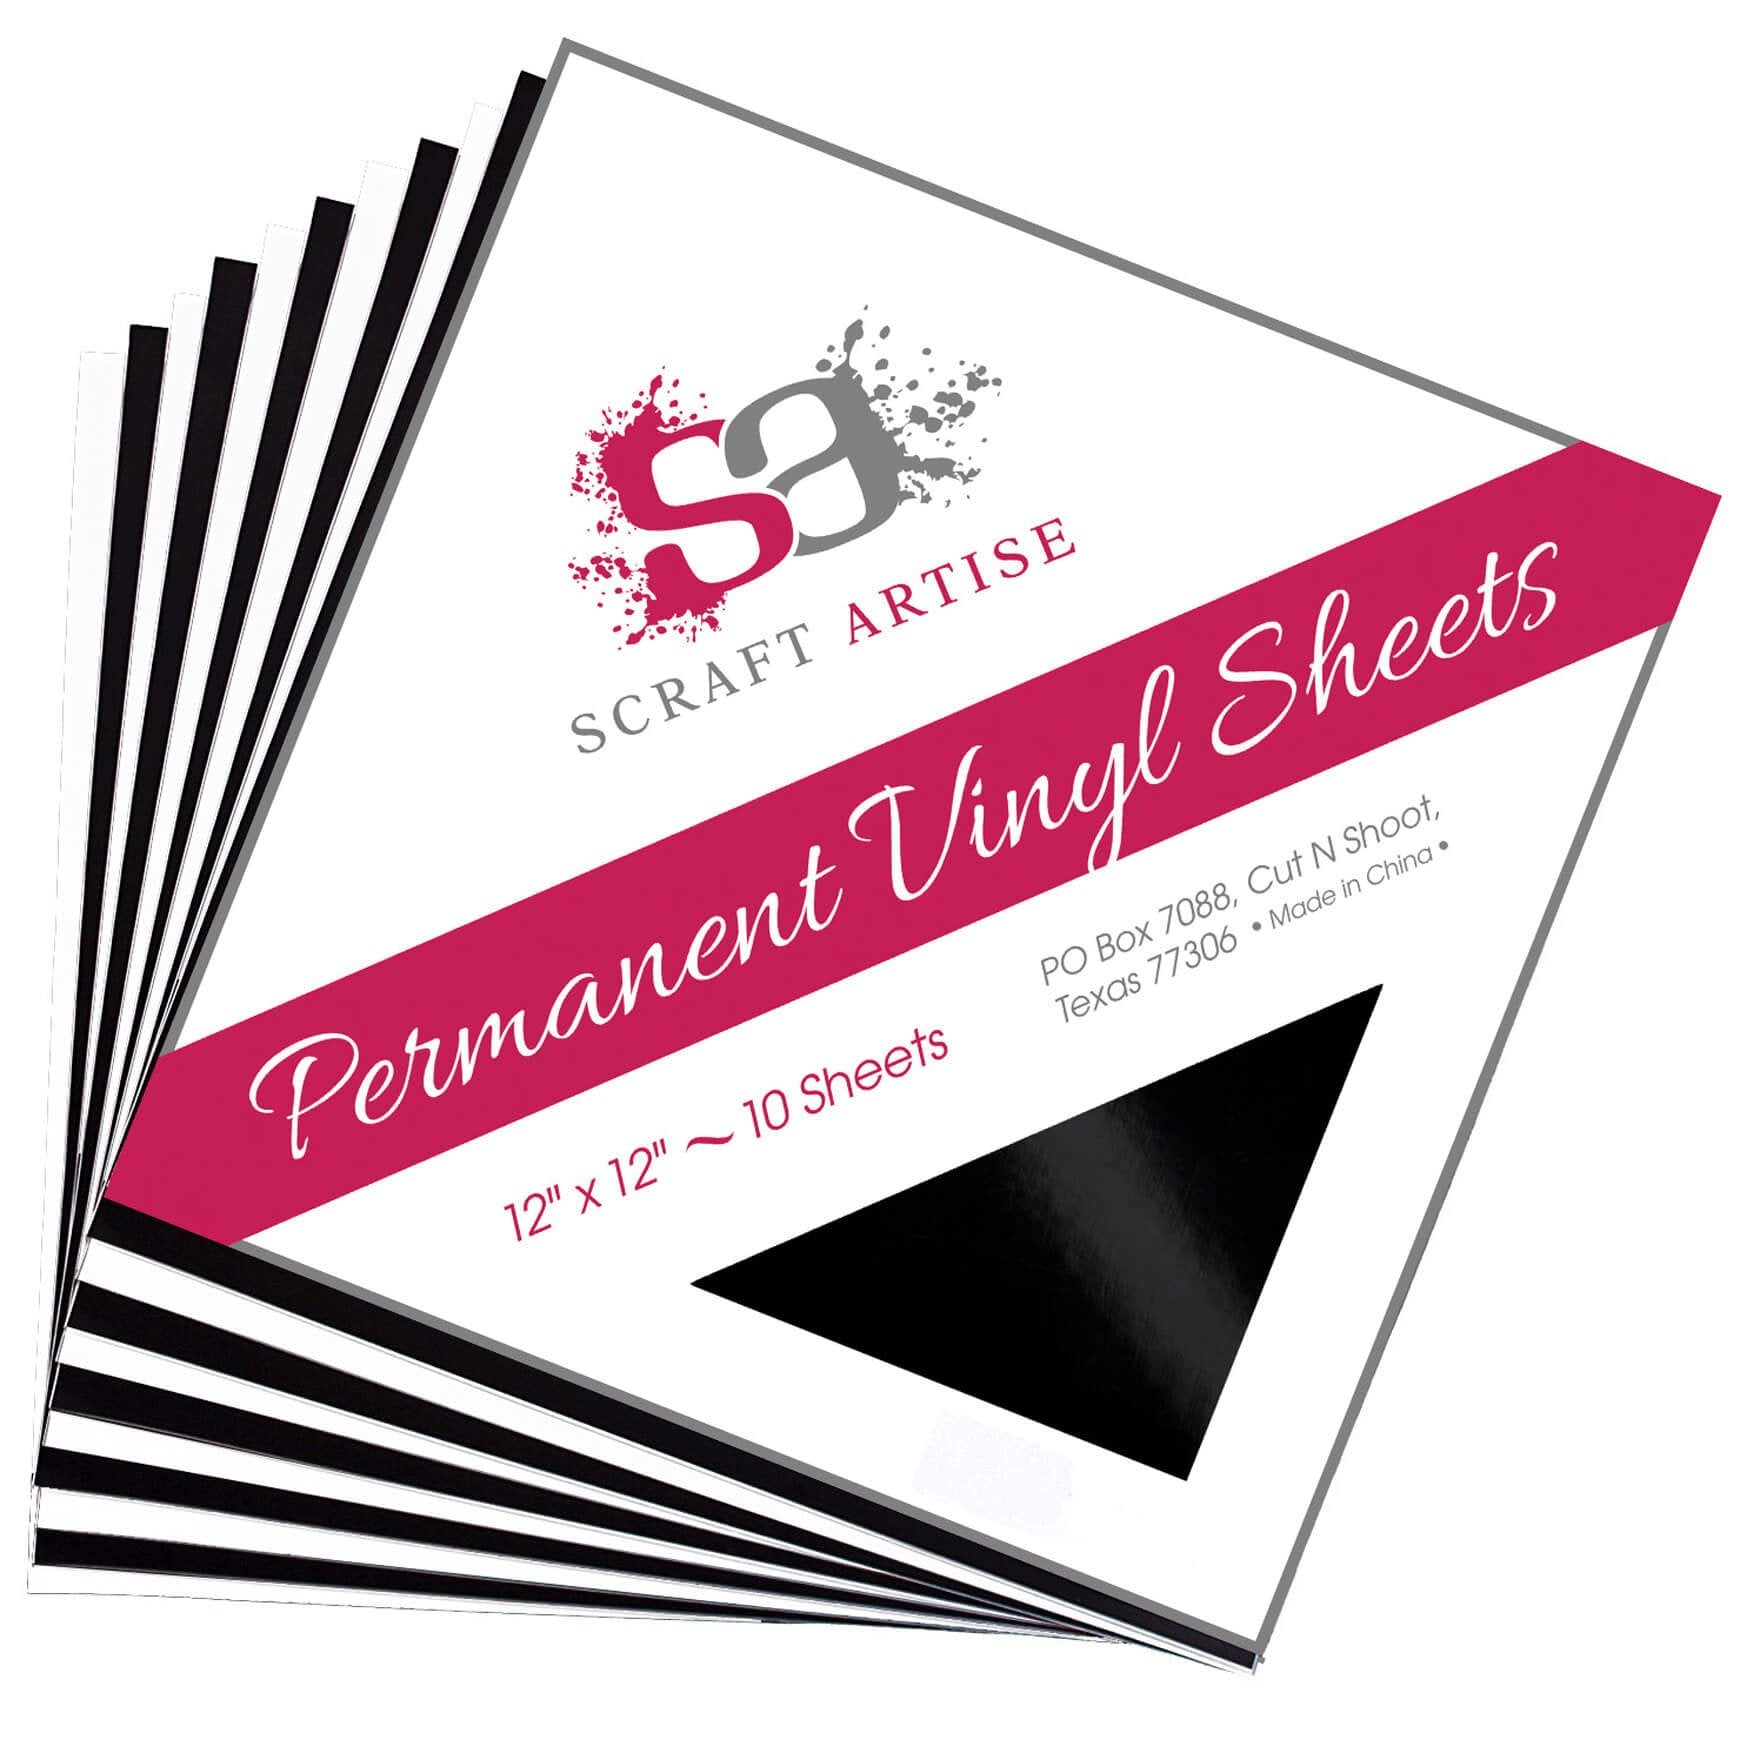 Scraft Artise Black and White Glossy Permanent Adhesive Craft Vinyl 12 x 12 Sheets - 10 Pack